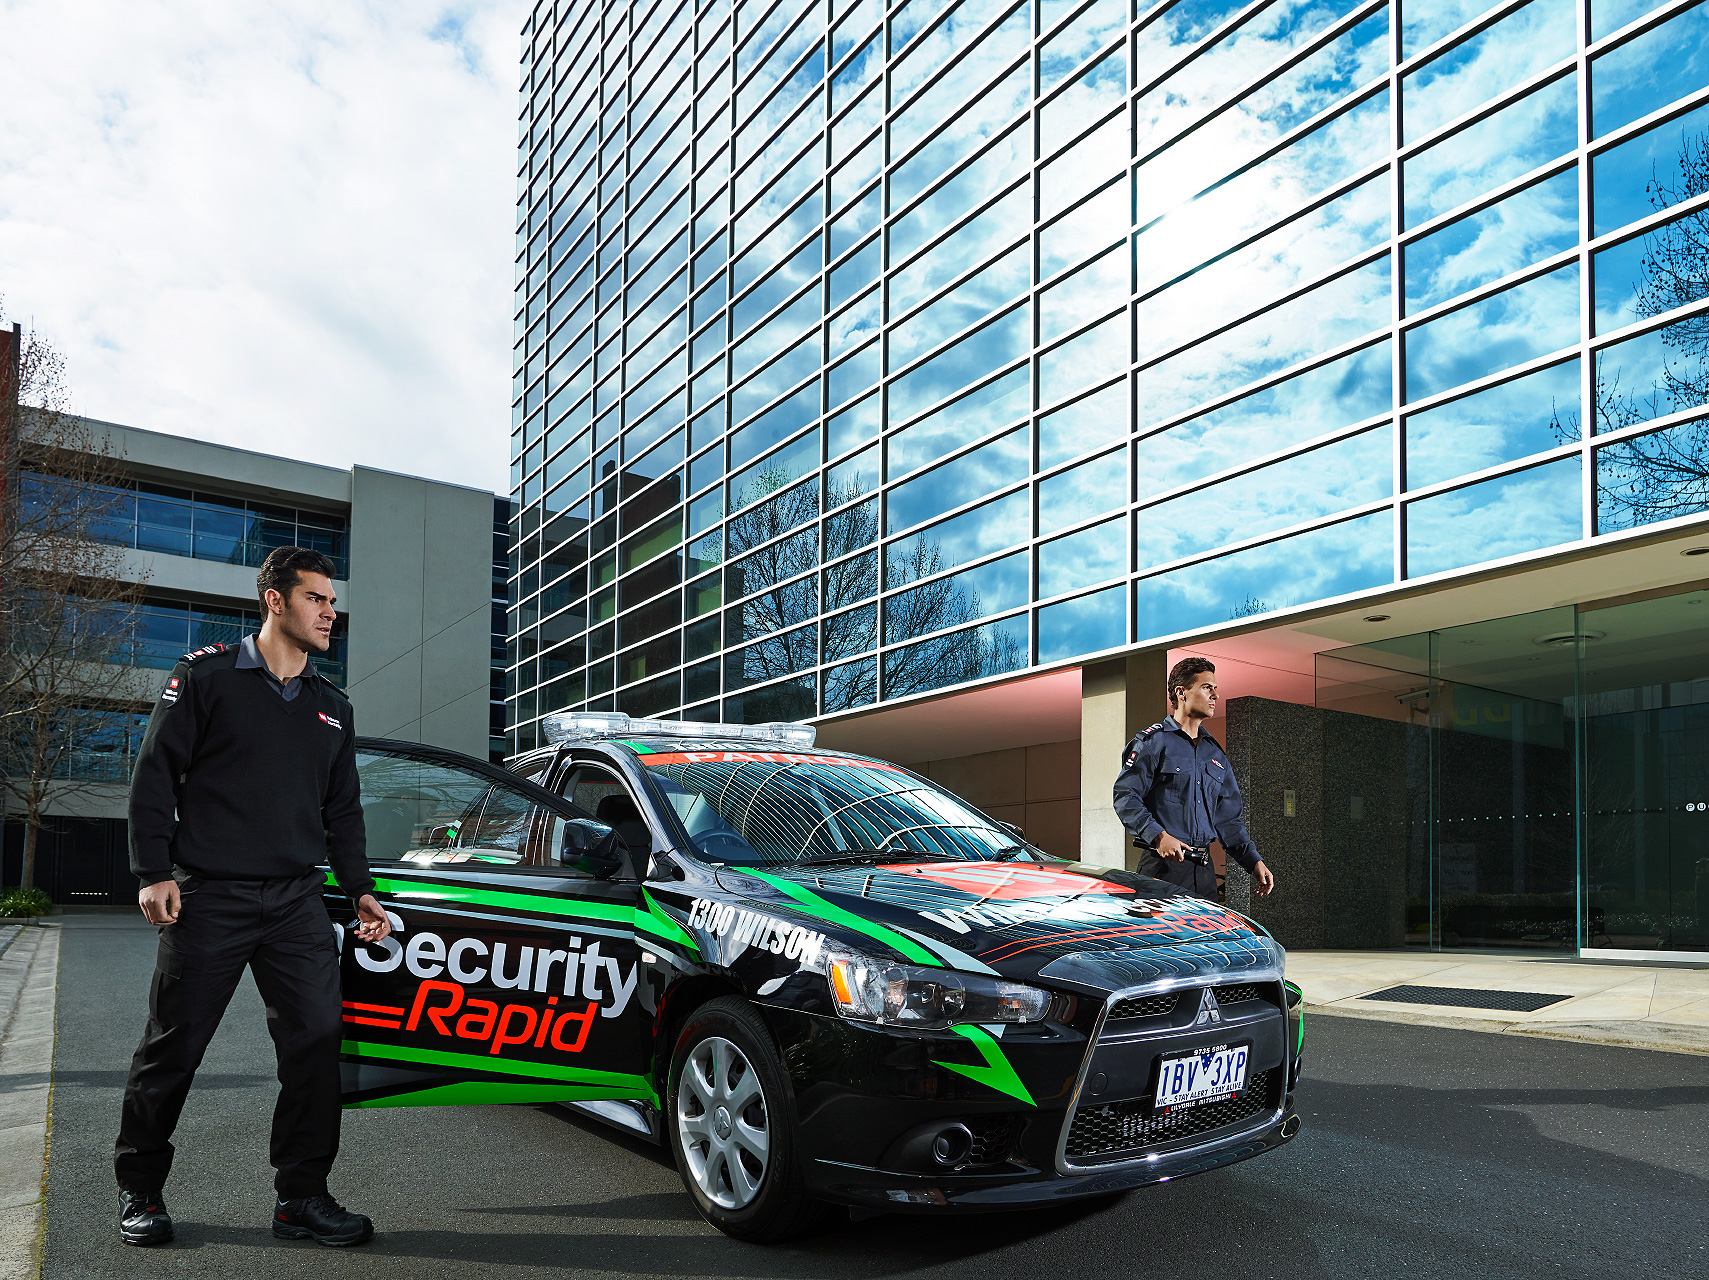 Photo @ Kristian Gehradte. Client: Wilson Security